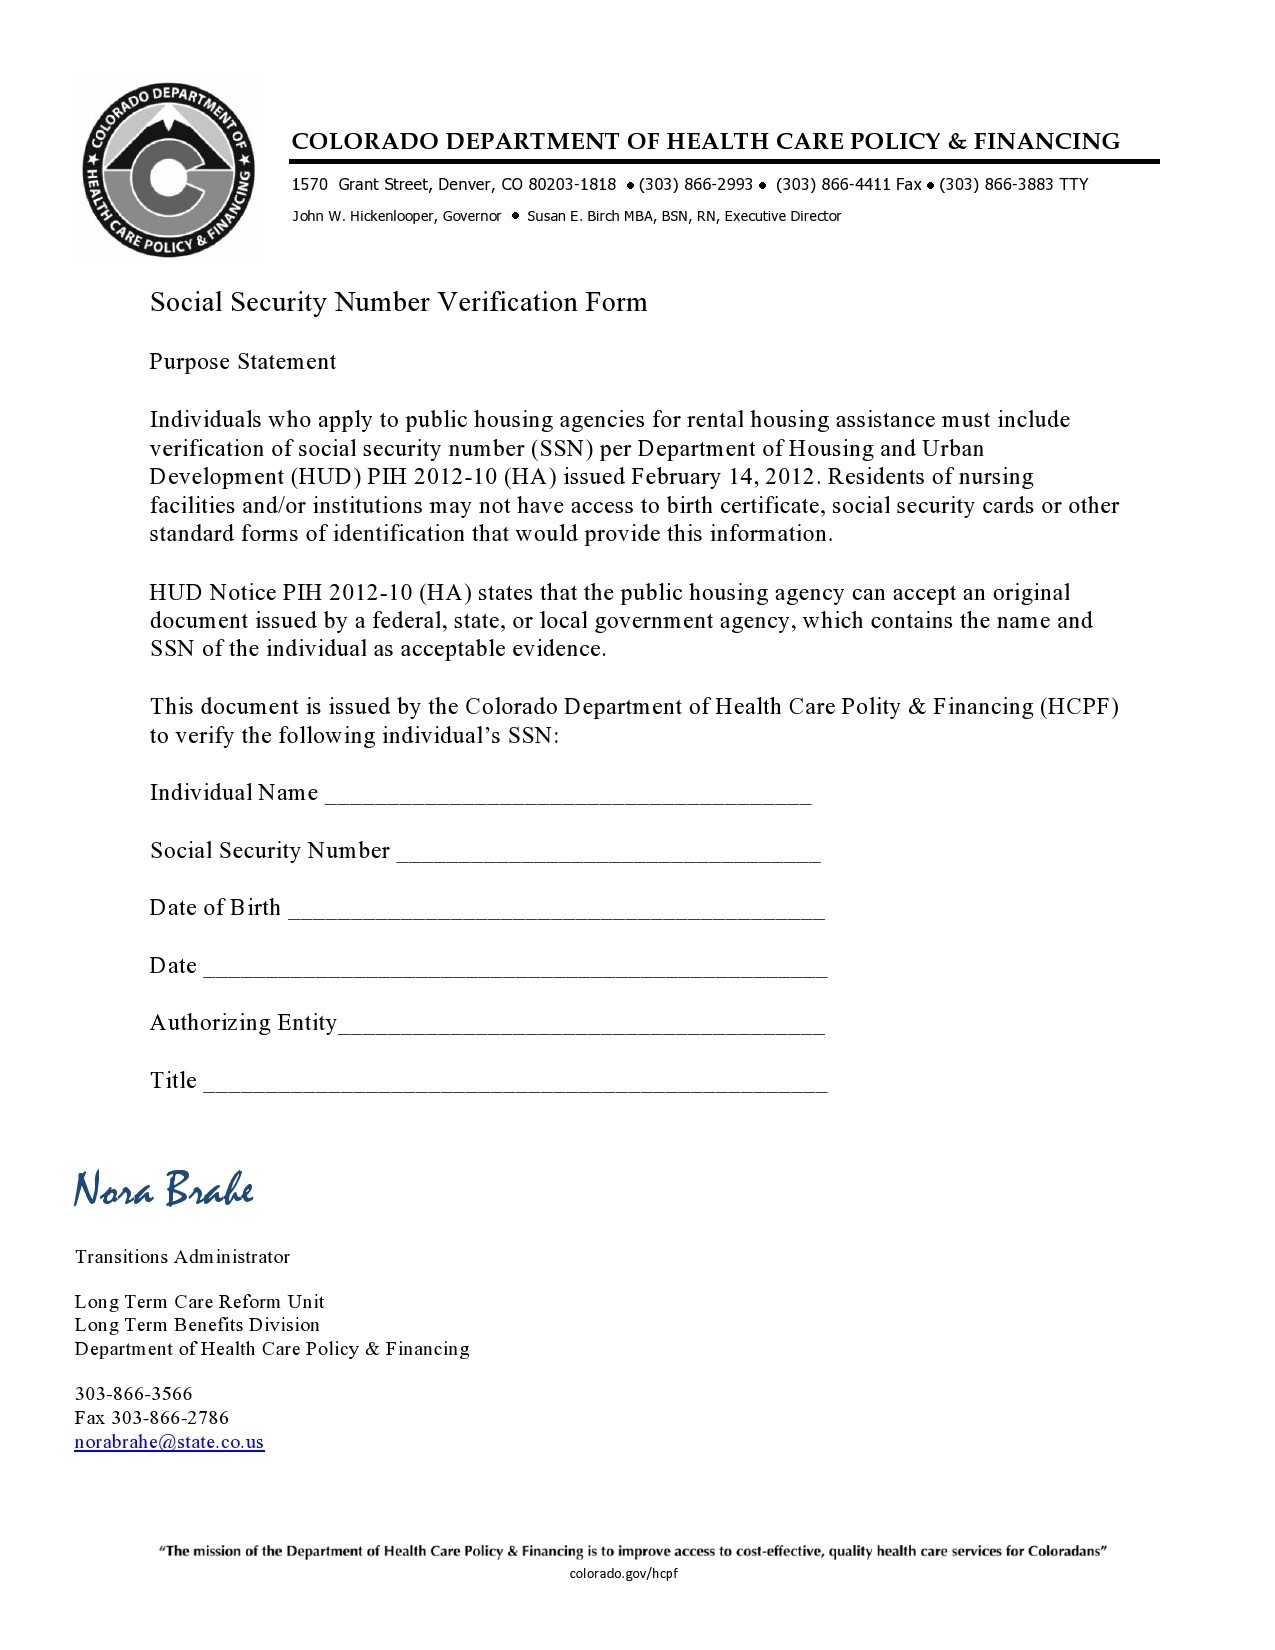 Free social security number verification letter 11